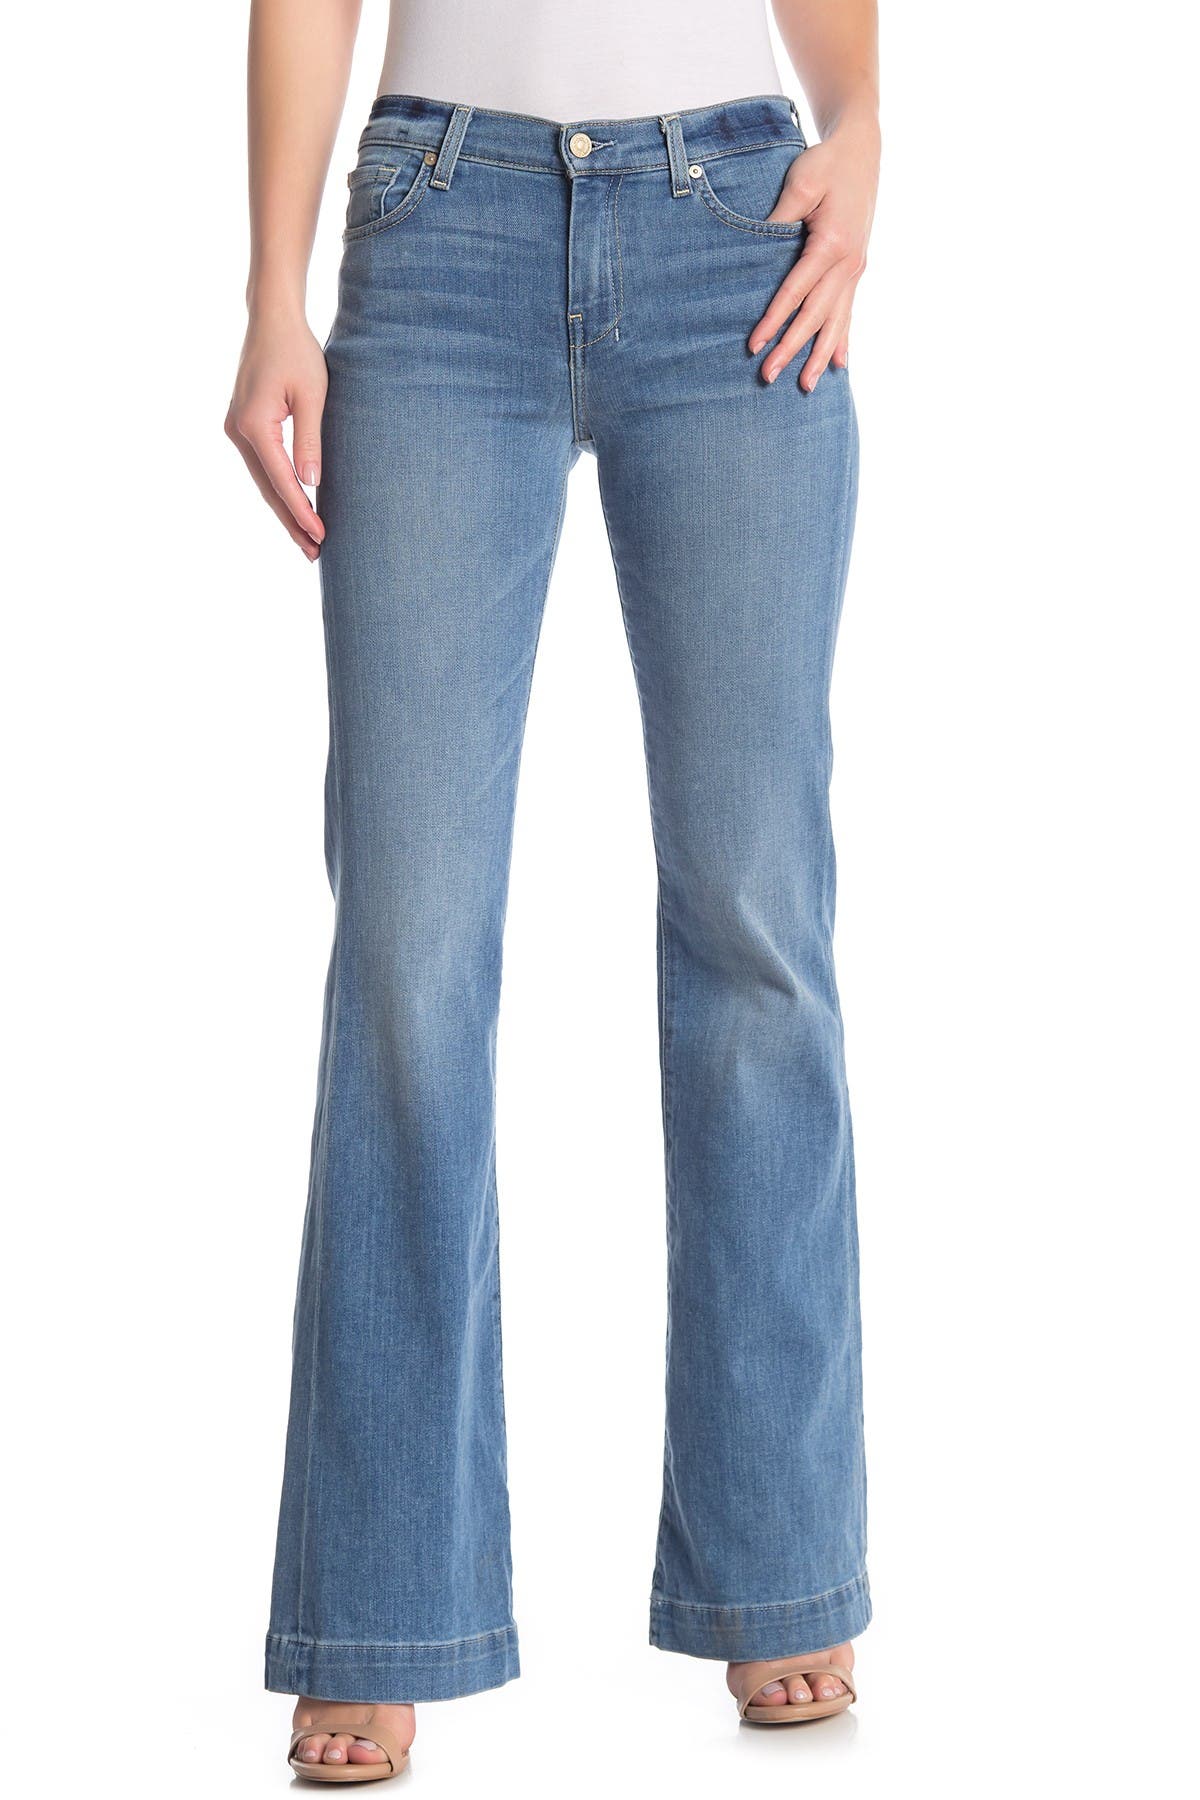 seven for all mankind plus size